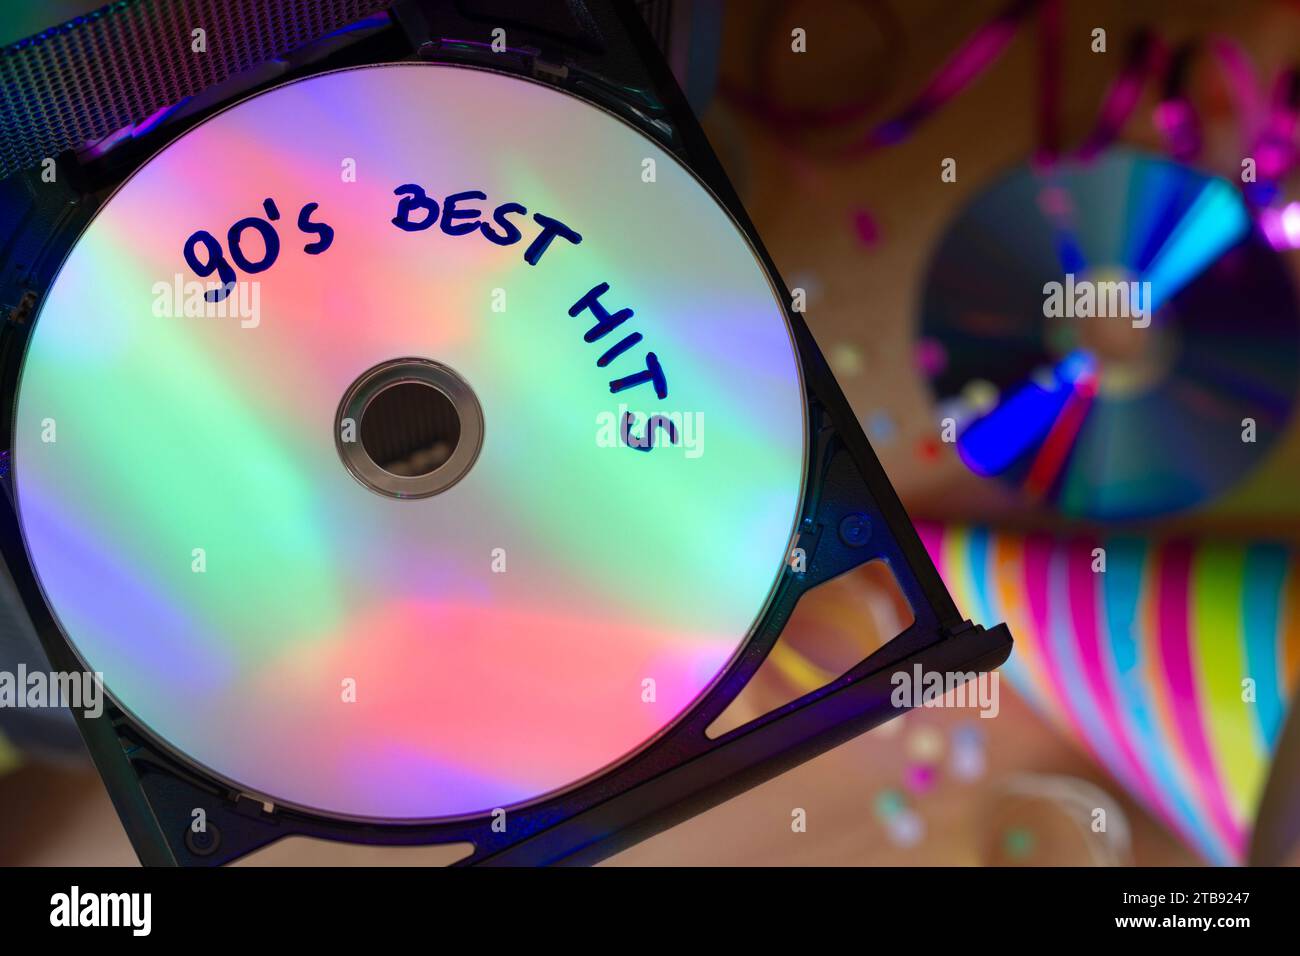 CD with music from 90s, disco party lights, party concept to 90s music Stock Photo